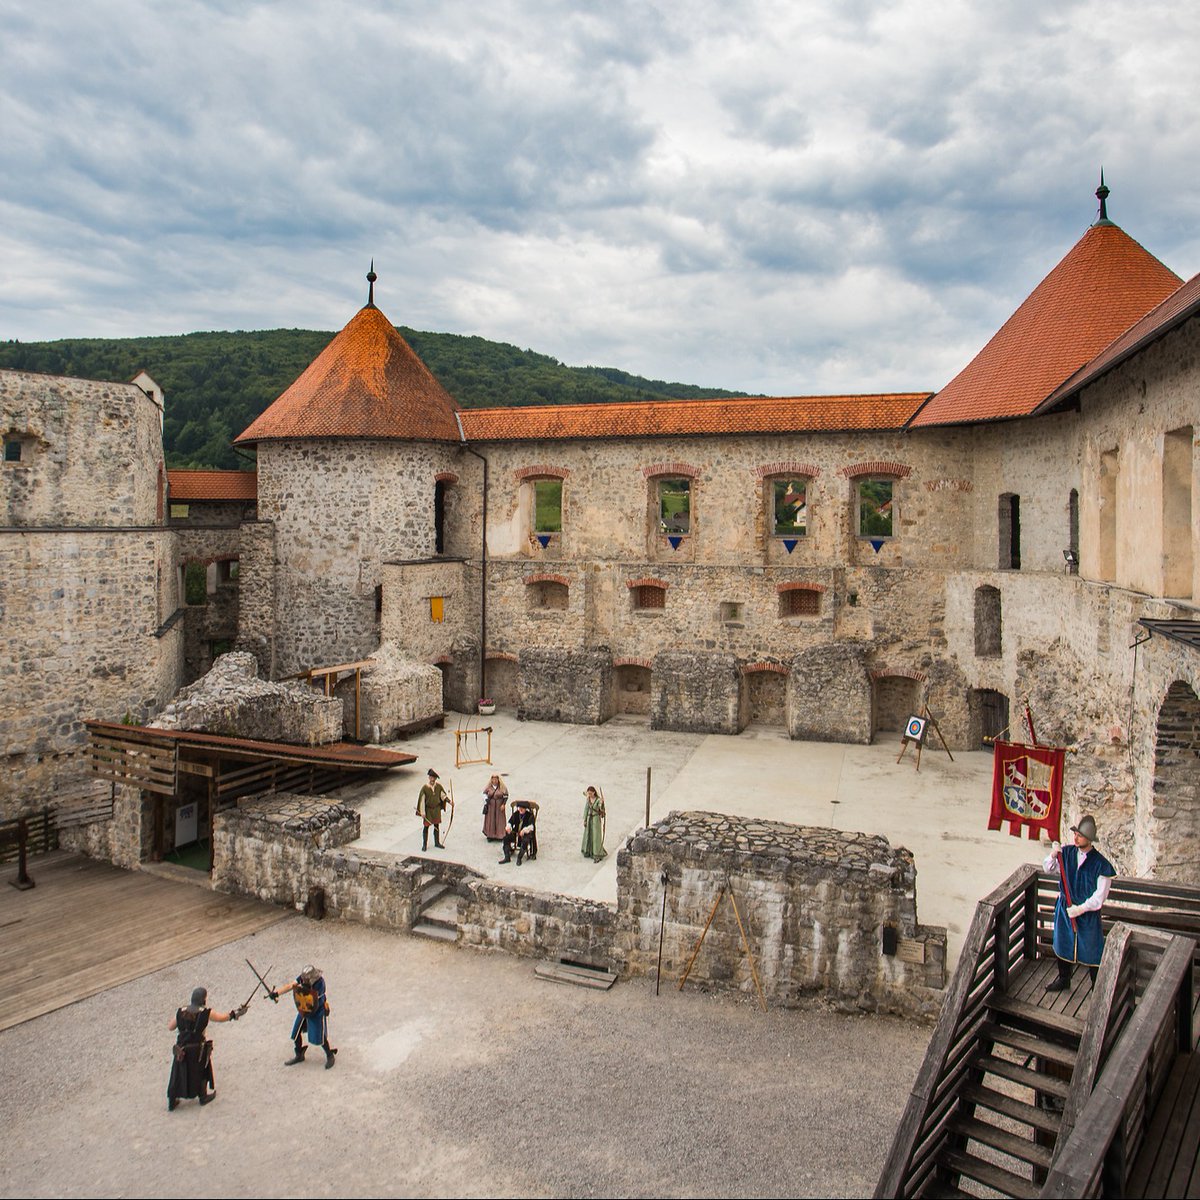 🕰️ Travel through history with archaeological heritage experiences! 🕰️

🏛️ Step back in time to the era of Romans, pile-dwellers, and discover exceptional artefacts, some of the oldest in the world!

#ifeelsLOVEnia #sloveniaculture

▶️ More here: ter.li/62le62